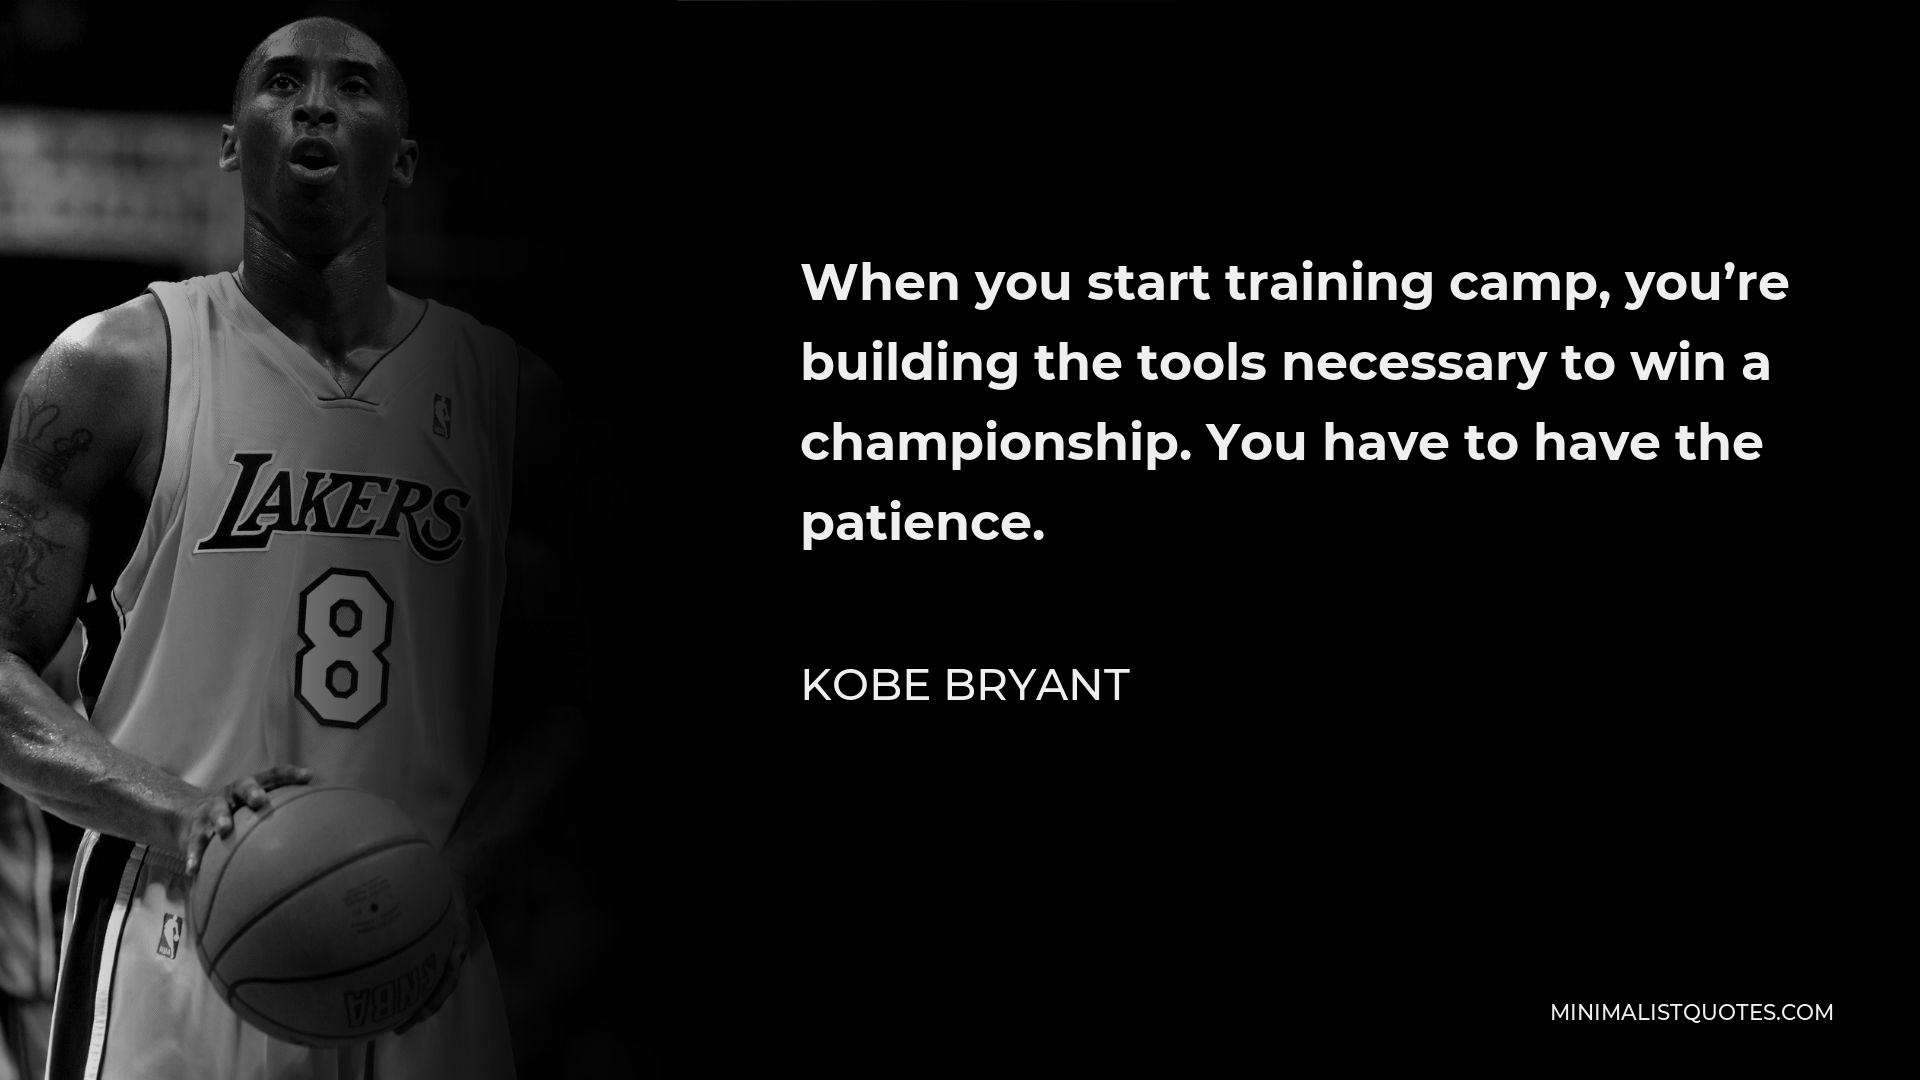 Kobe Bryant Quote - When you start training camp, you’re building the tools necessary to win a championship. You have to have the patience.